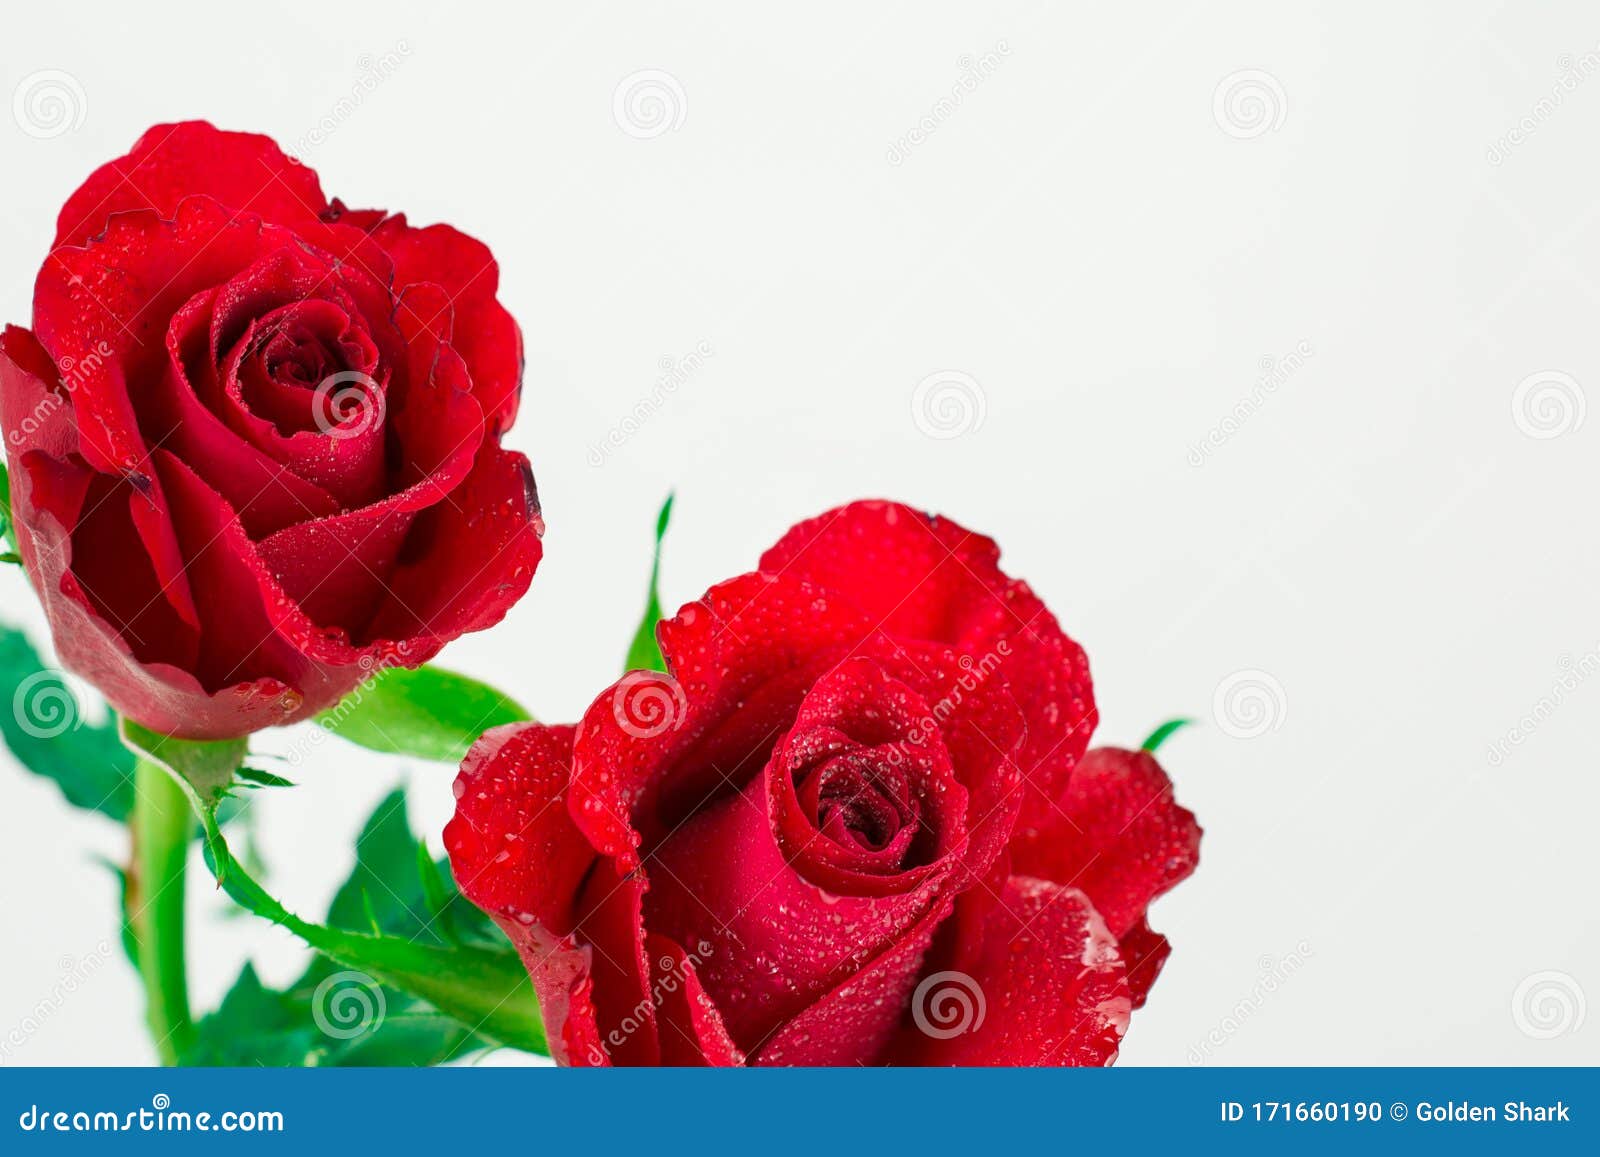 two red roses on white background